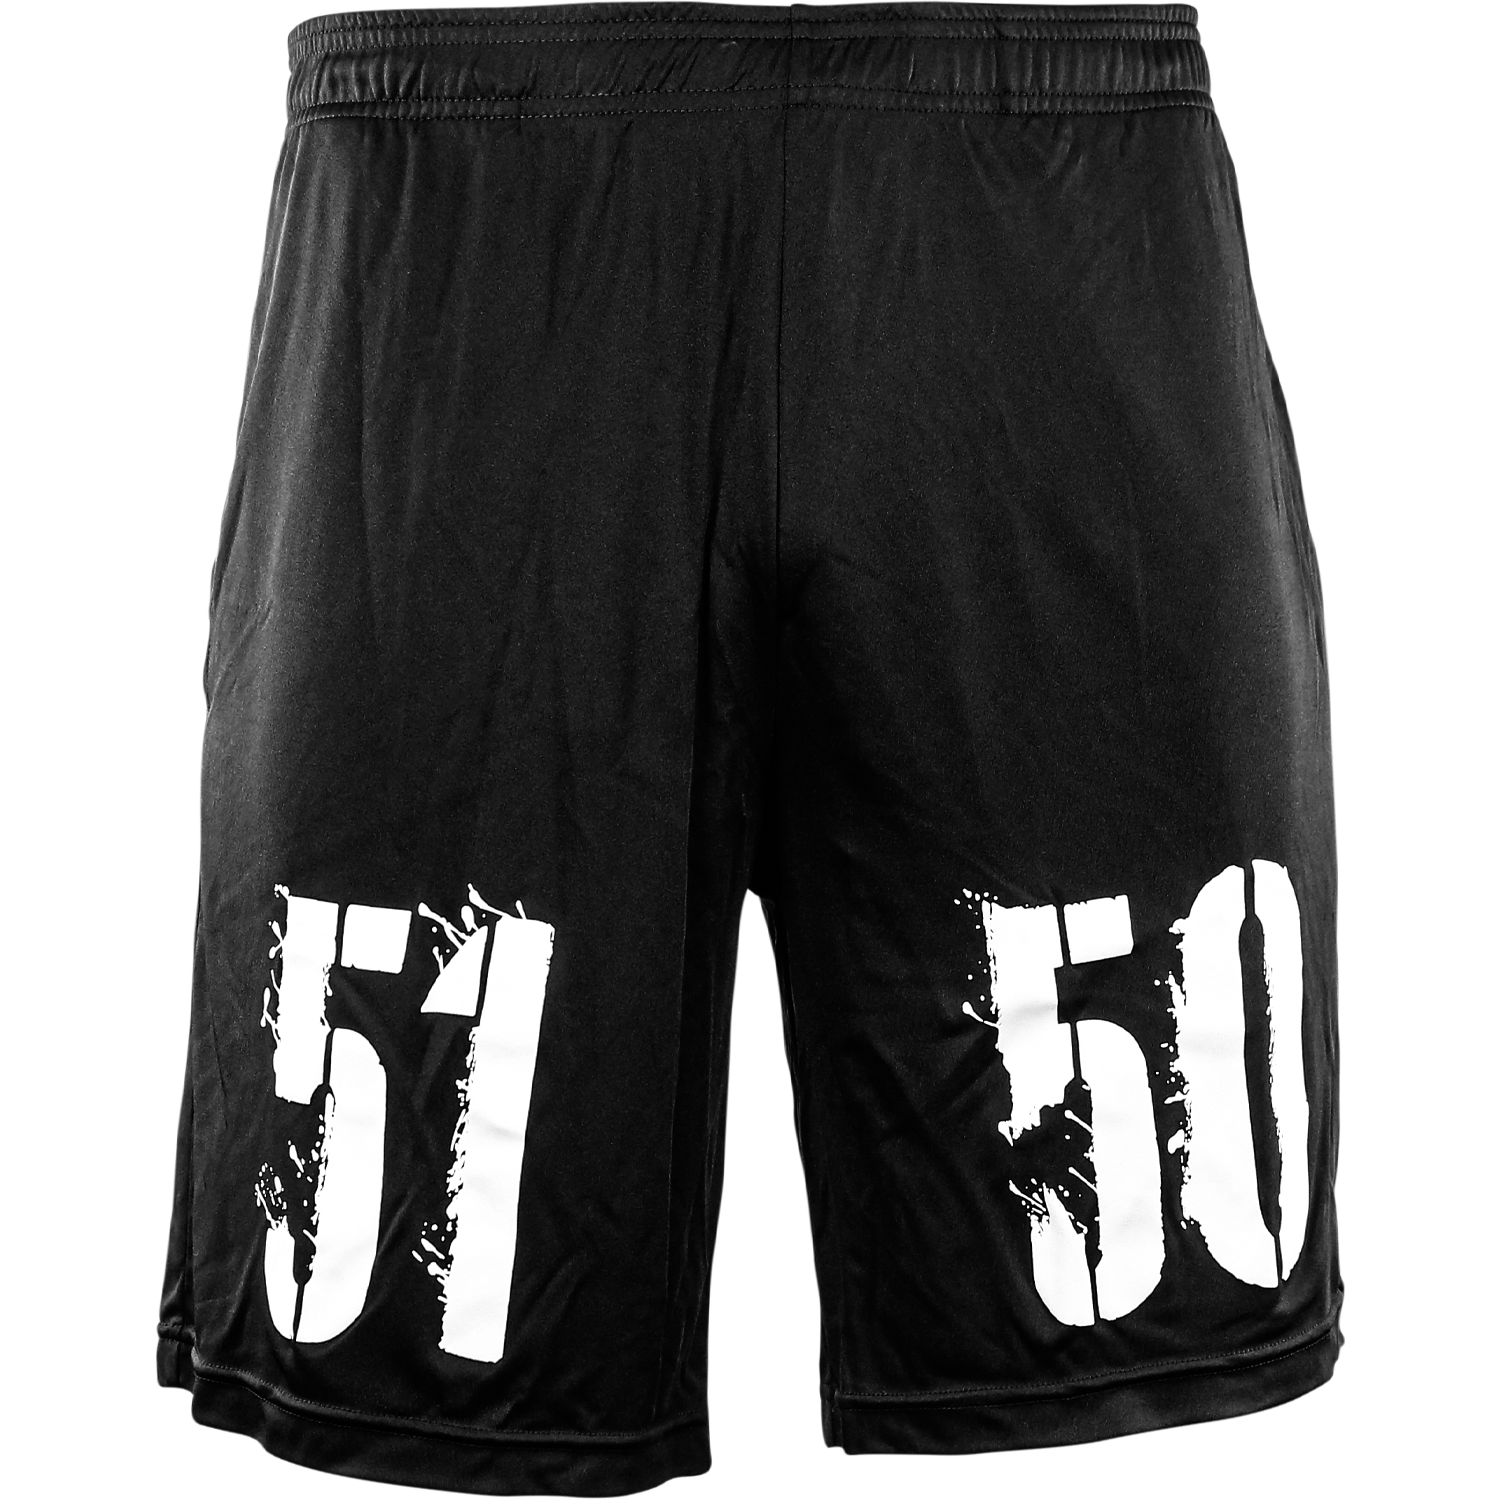 5150 Black Shorts with White Lettering